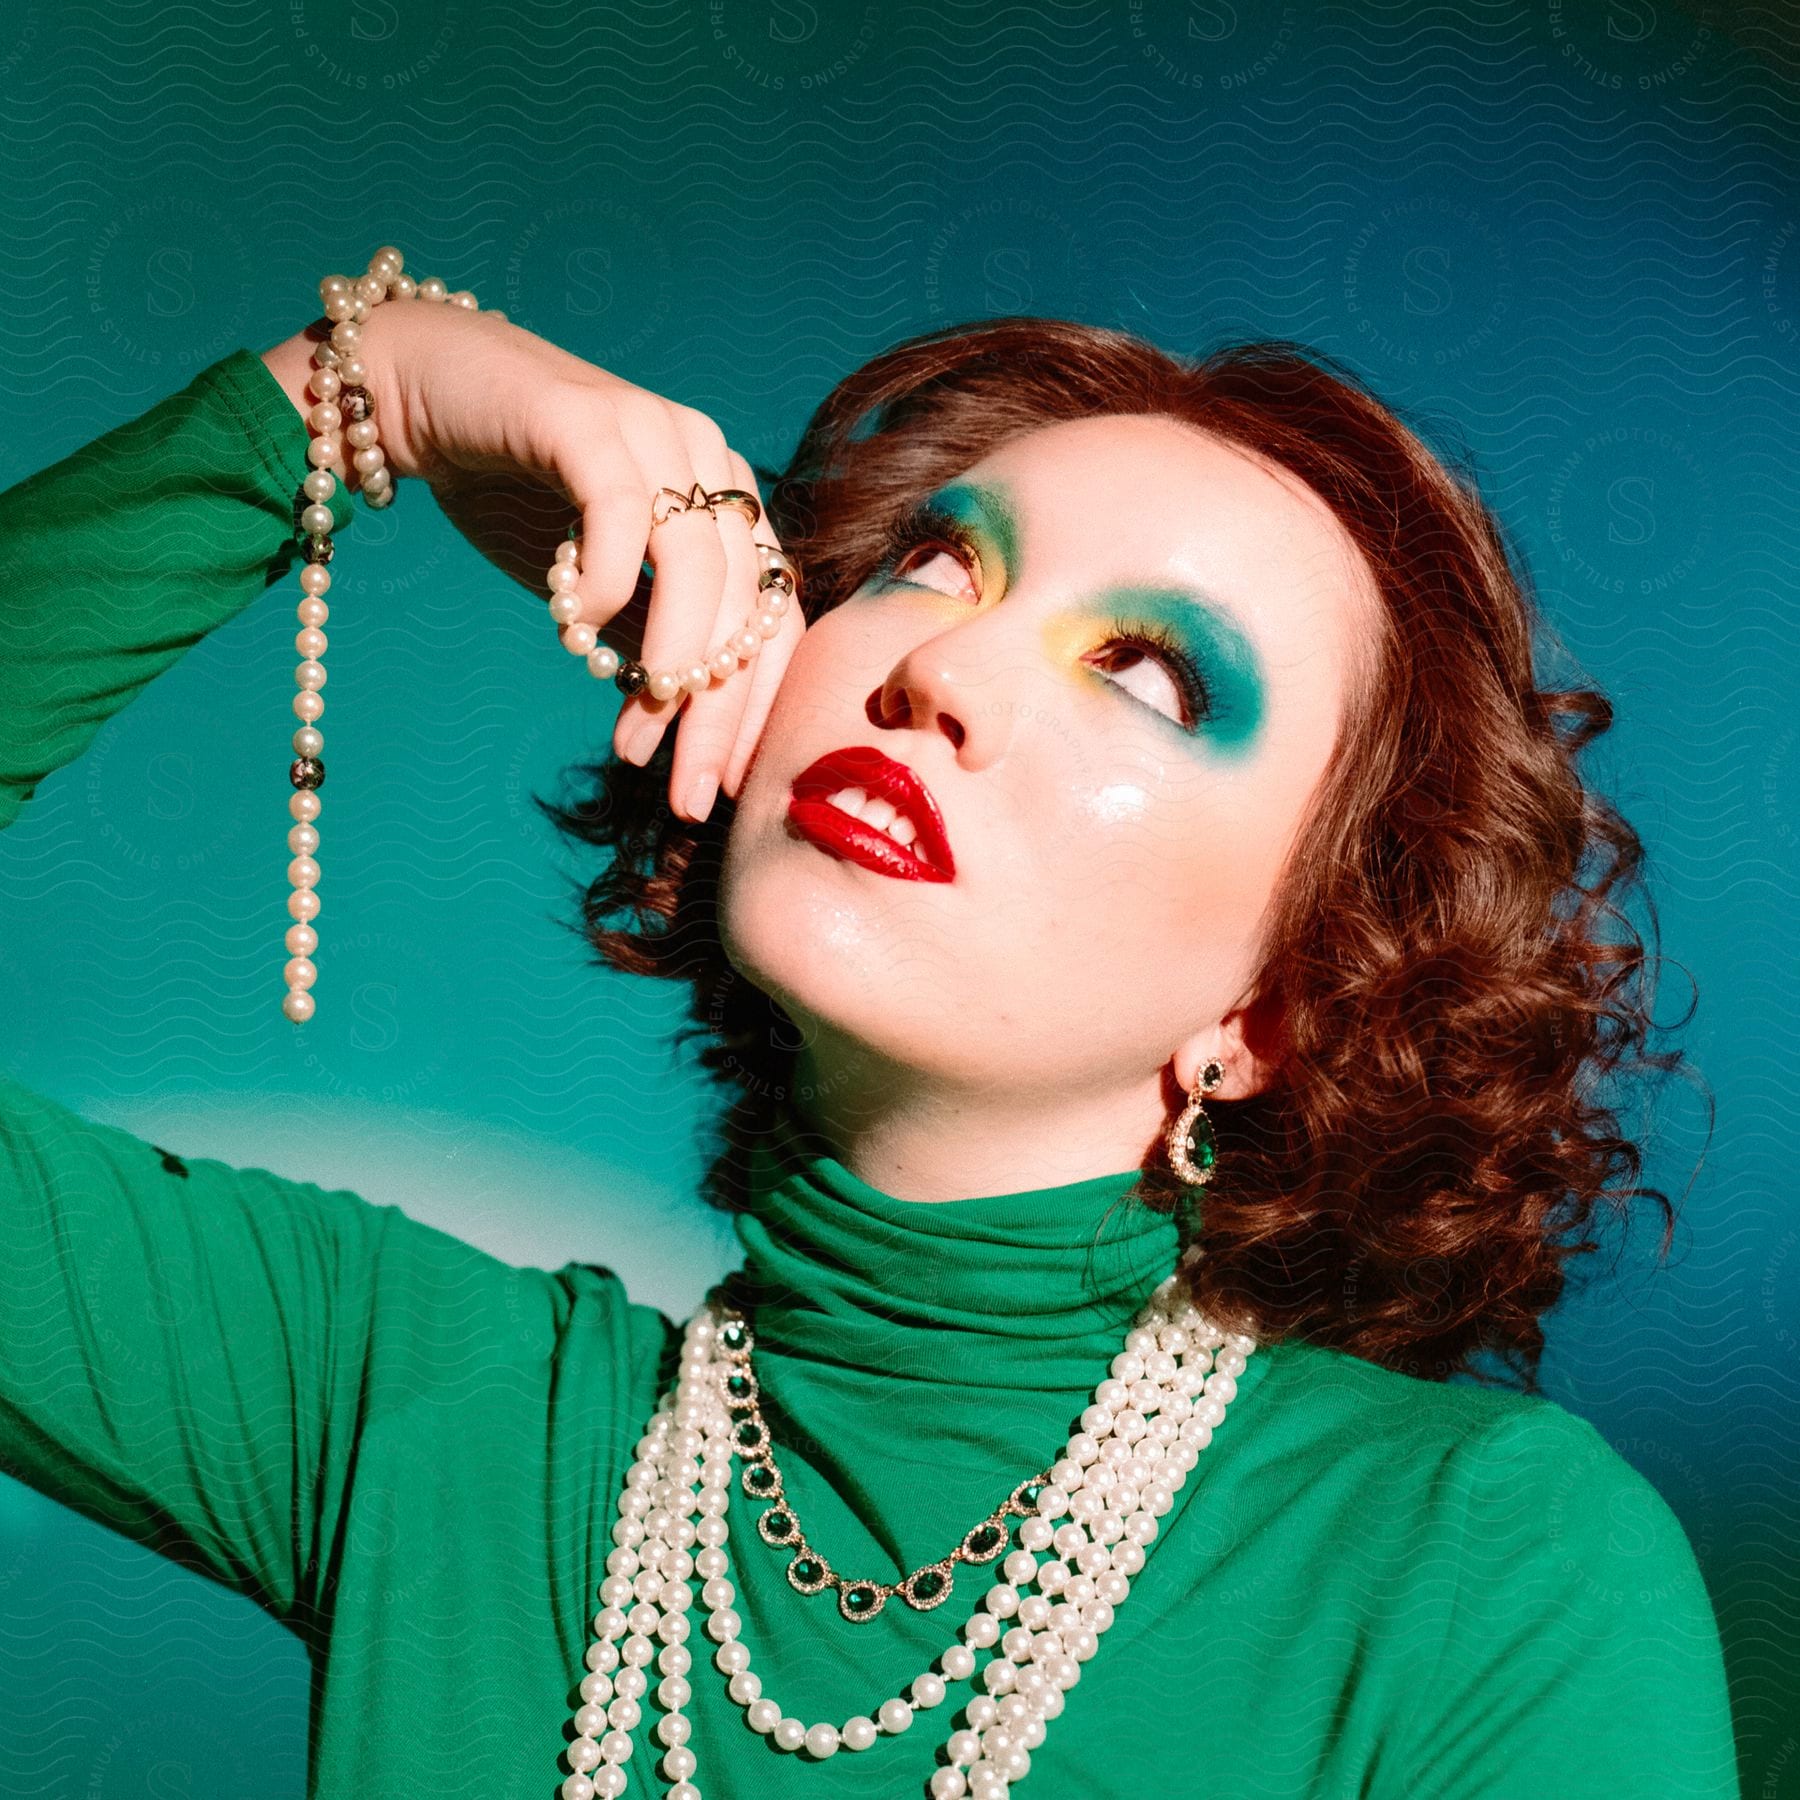 A redhaired female model wearing a green turtleneck and pearl jewelry poses with her head tilted up and to the right her right elbow above her shoulder and hand touching her cheek